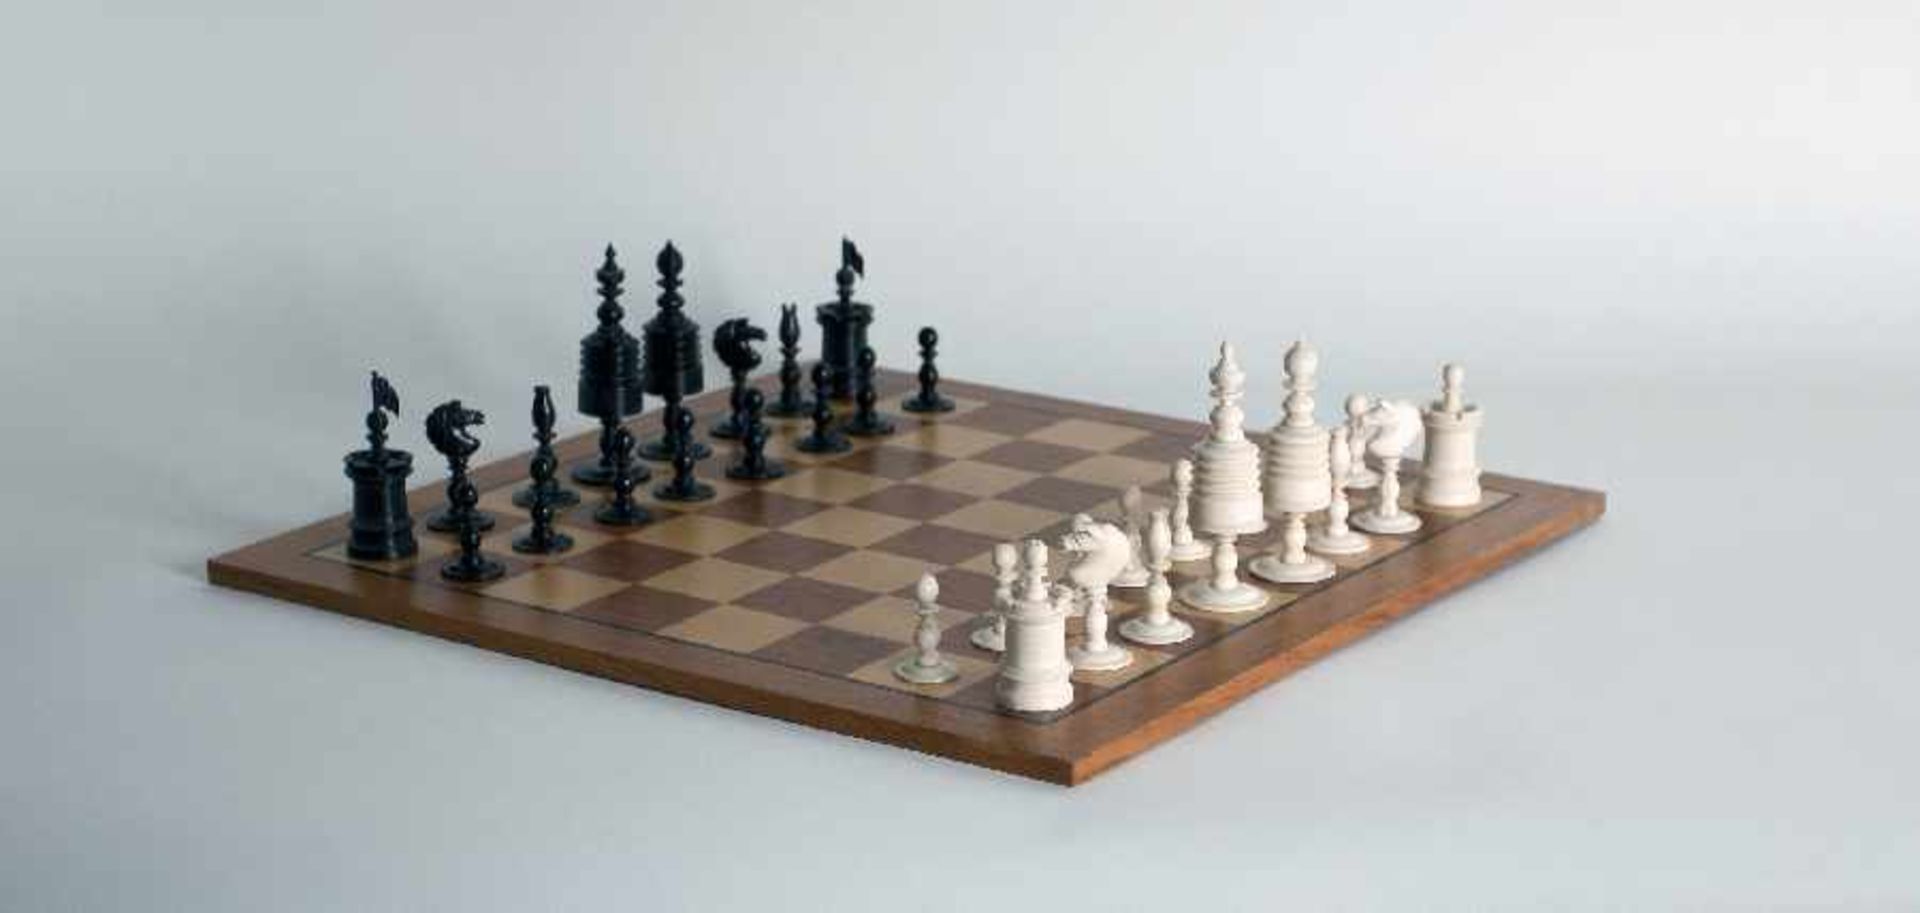 Probably India around 1900ChessBone, painted; H up to 10.5 cm, W up to 3.5 cm; 32 figures, game